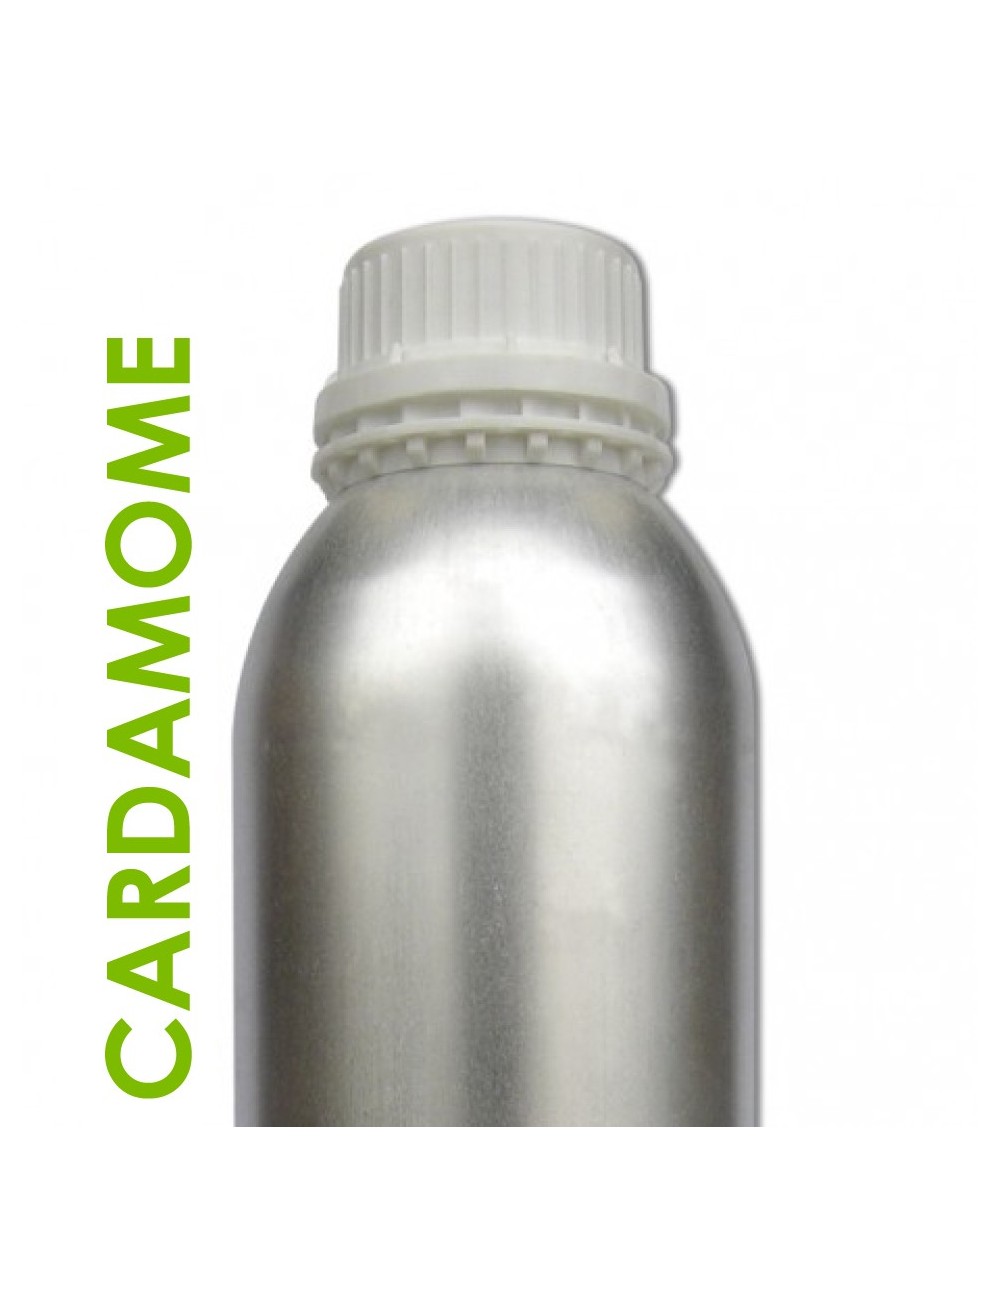 Cardamome Huile essentielle 1 Litre Ecocertifiable